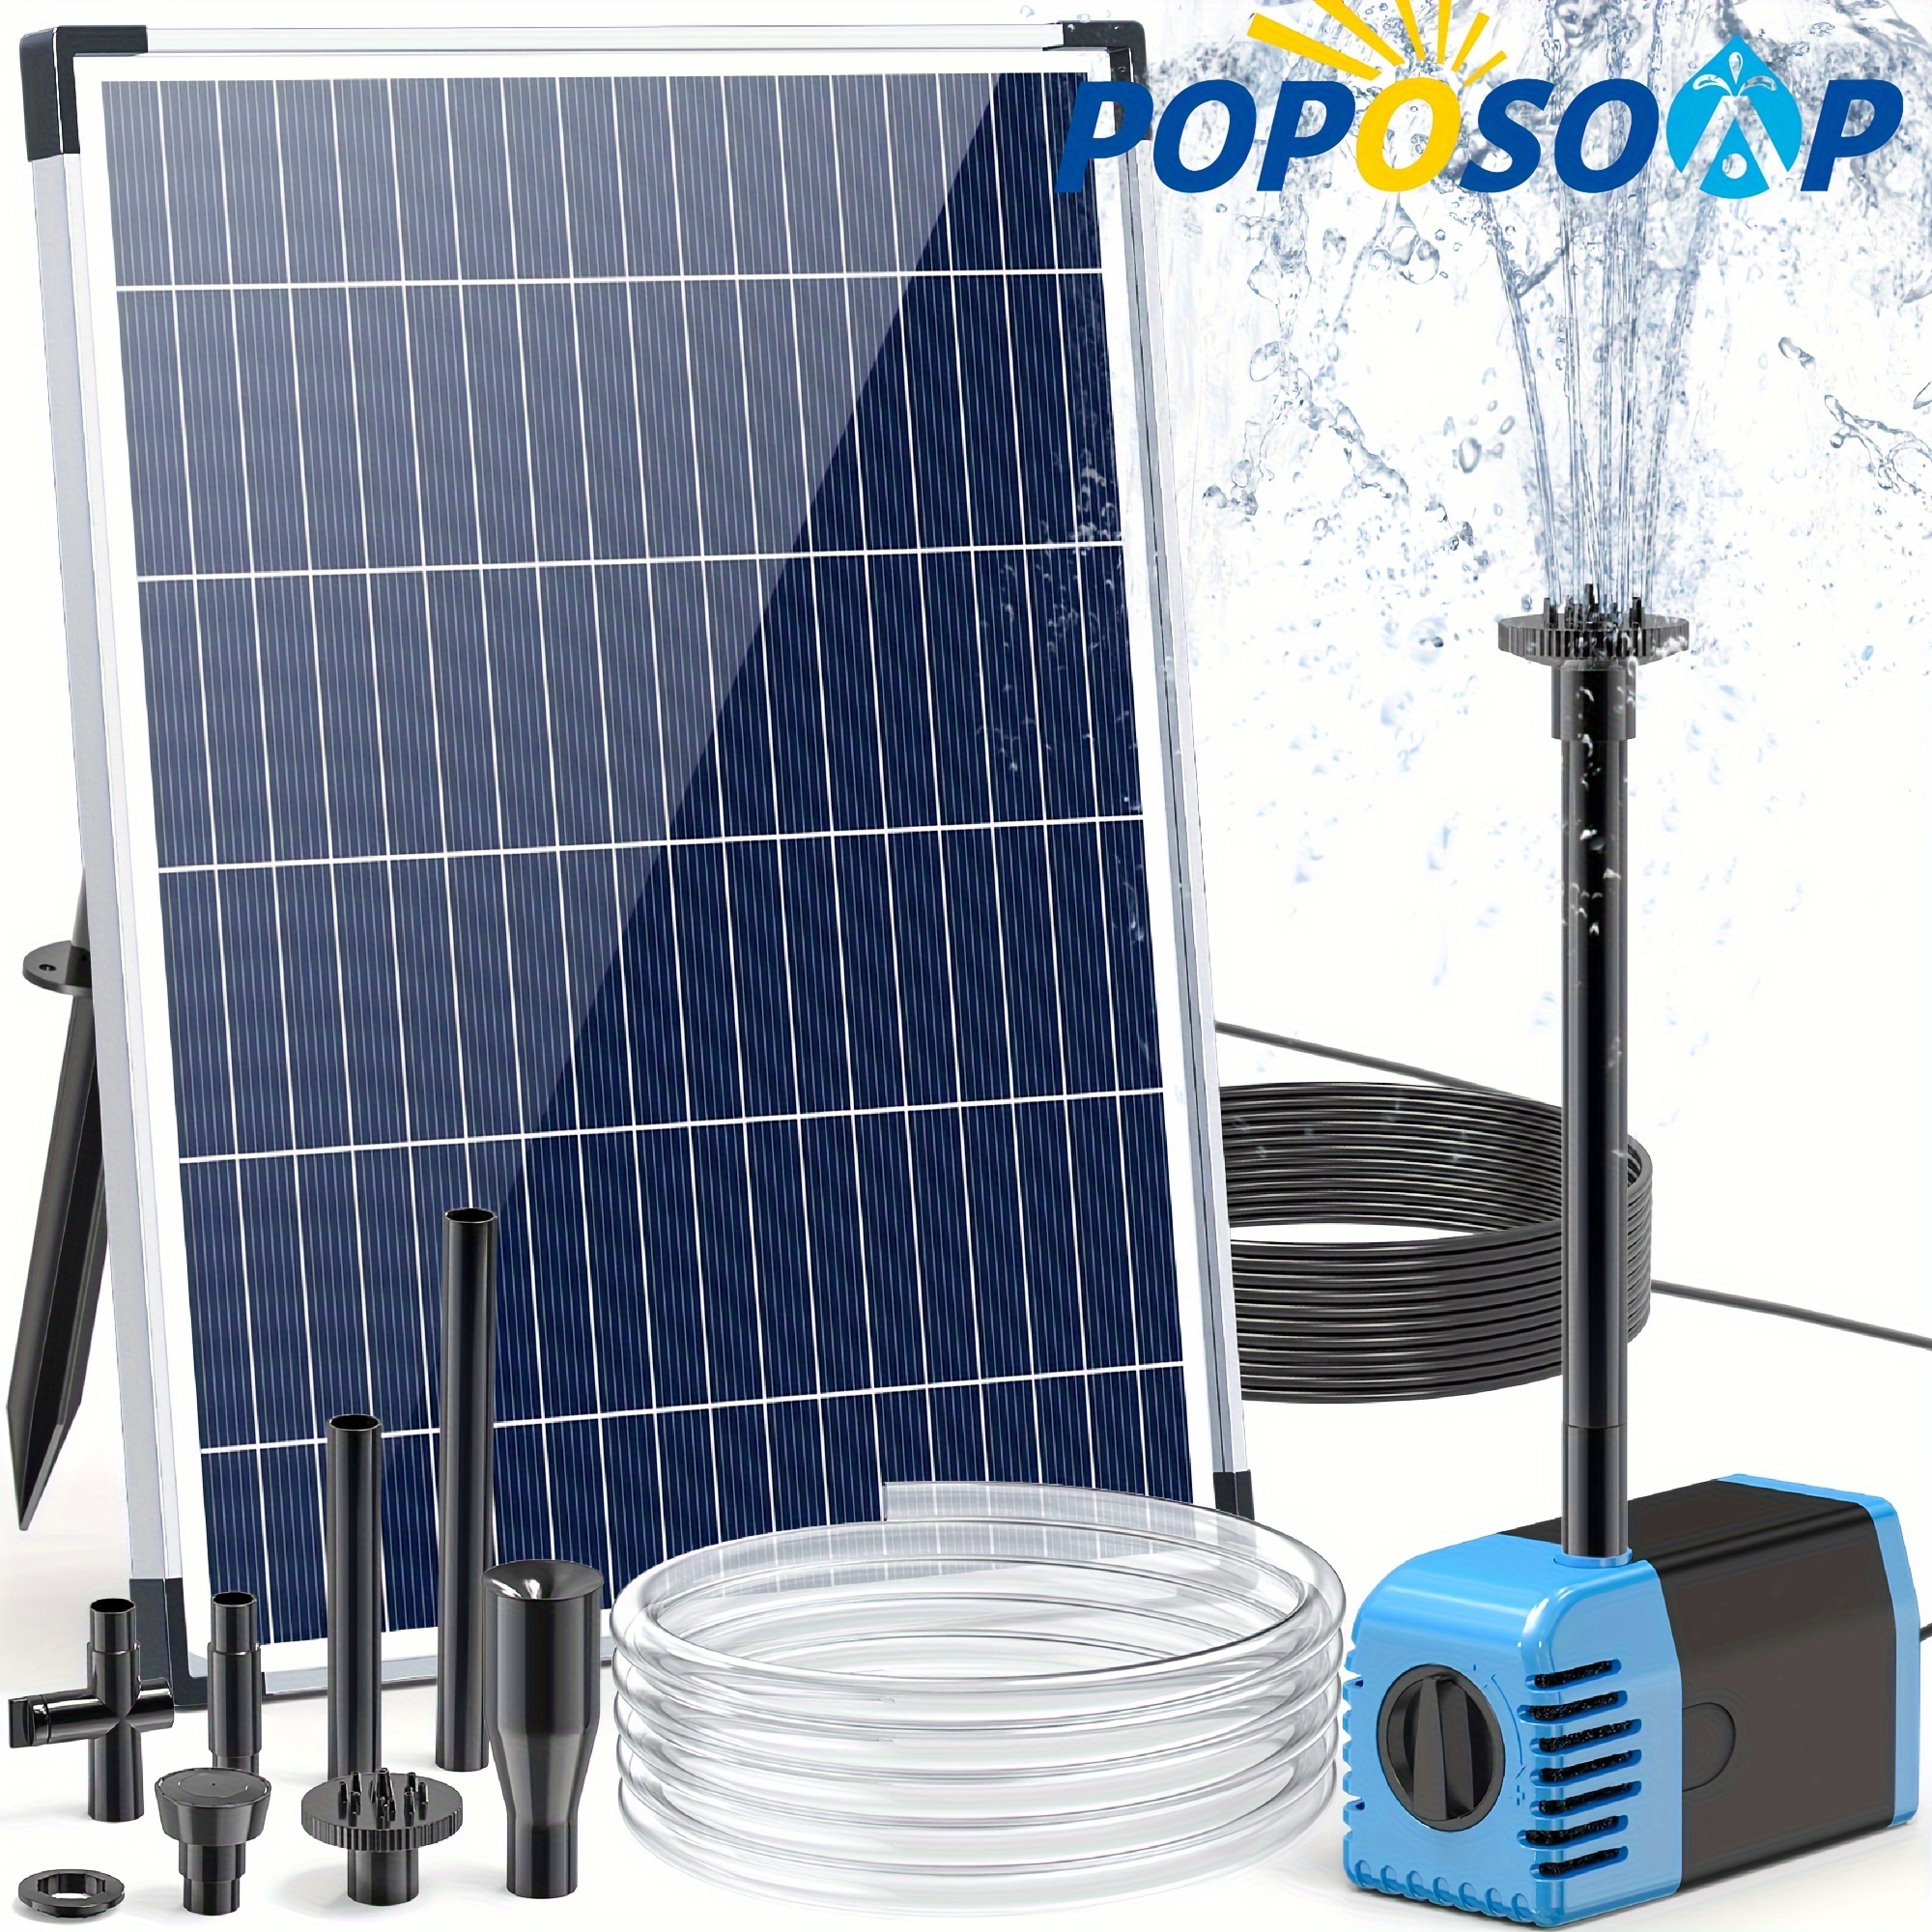 

Poposoap Solar Water Fountain Pump 12w, Solar Powered Fountain Pump With 160gph Submersible Pump, 4 Sprayers, 16.4ft Cable, 6.6ft Tubing For Pond, Fish Tank, Pool, Bird Bath, Garden Water